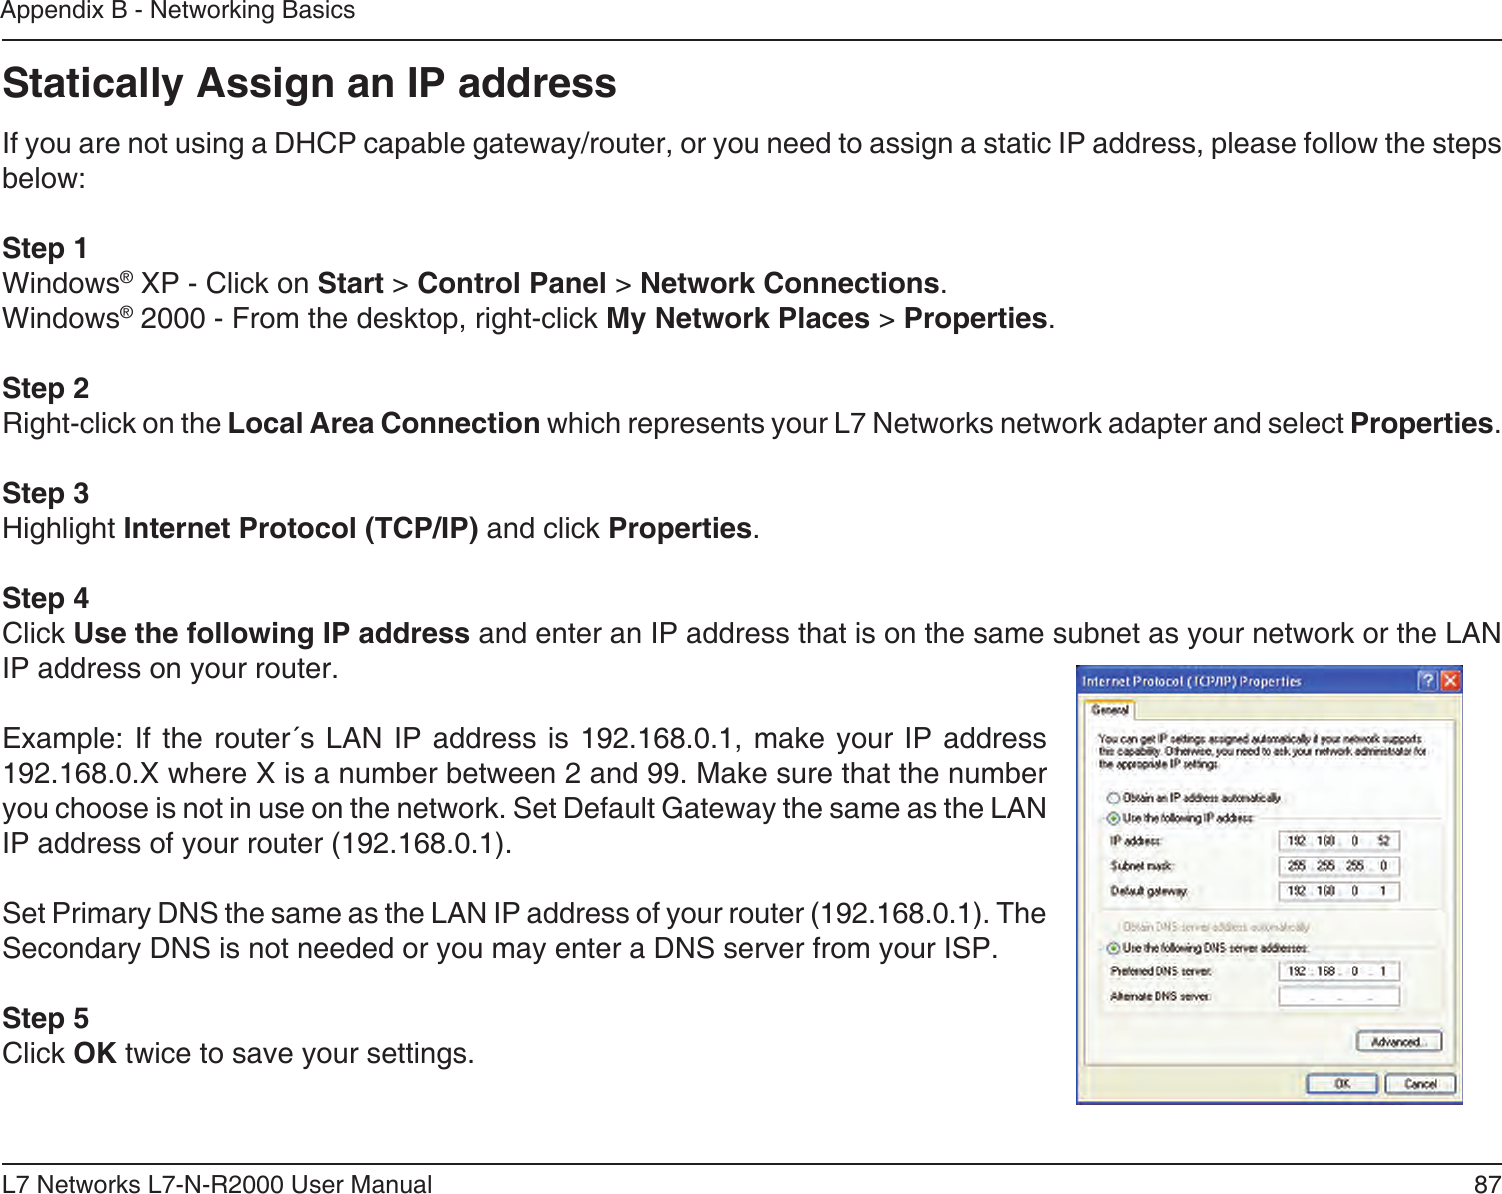 87L7 Networks L7-N-R2000 User ManualAppendix B - Networking BasicsStatically Assign an IP addressIf you are not using a DHCP capable gateway/router, or you need to assign a static IP address, please follow the steps below:Step 1Windows® XP - Click on Start &gt; Control Panel &gt; Network Connections.Windows® 2000 - From the desktop, right-click My Network Places &gt; Properties.Step 2Right-click on the Local Area Connection which represents your L7 Networks network adapter and select Properties.Step 3Highlight Internet Protocol (TCP/IP) and click Properties.Step 4Click Use the following IP address and enter an IP address that is on the same subnet as your network or the LAN IP address on your router. Example: If the router´s  LAN  IP address is  192.168.0.1, make your  IP  address 192.168.0.X where X is a number between 2 and 99. Make sure that the number you choose is not in use on the network. Set Default Gateway the same as the LAN IP address of your router (192.168.0.1). Set Primary DNS the same as the LAN IP address of your router (192.168.0.1). The Secondary DNS is not needed or you may enter a DNS server from your ISP.Step 5Click OK twice to save your settings.